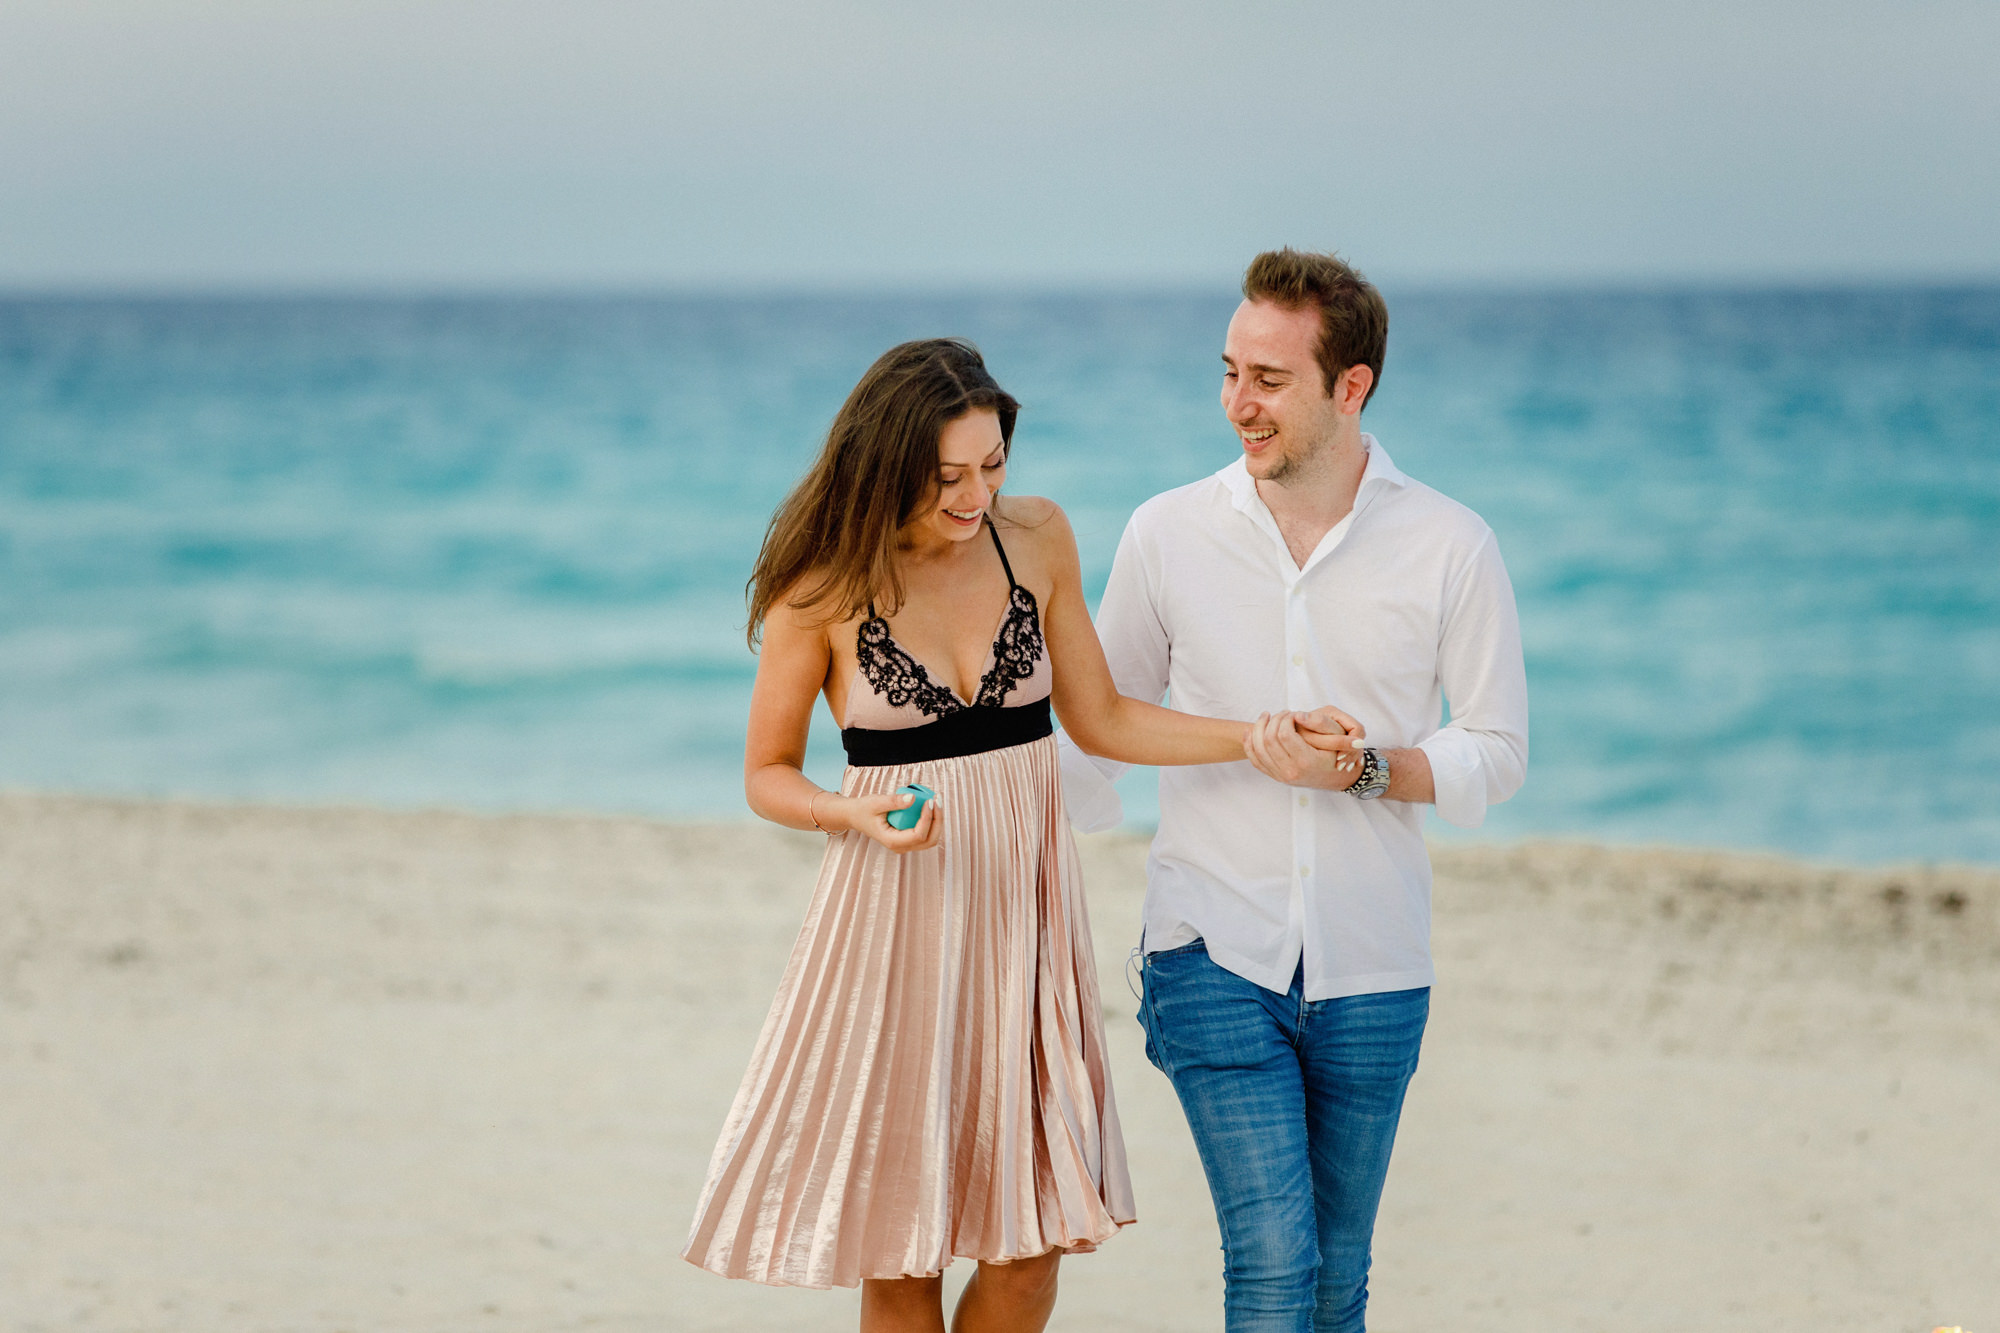 lifestyle photography in Cancun